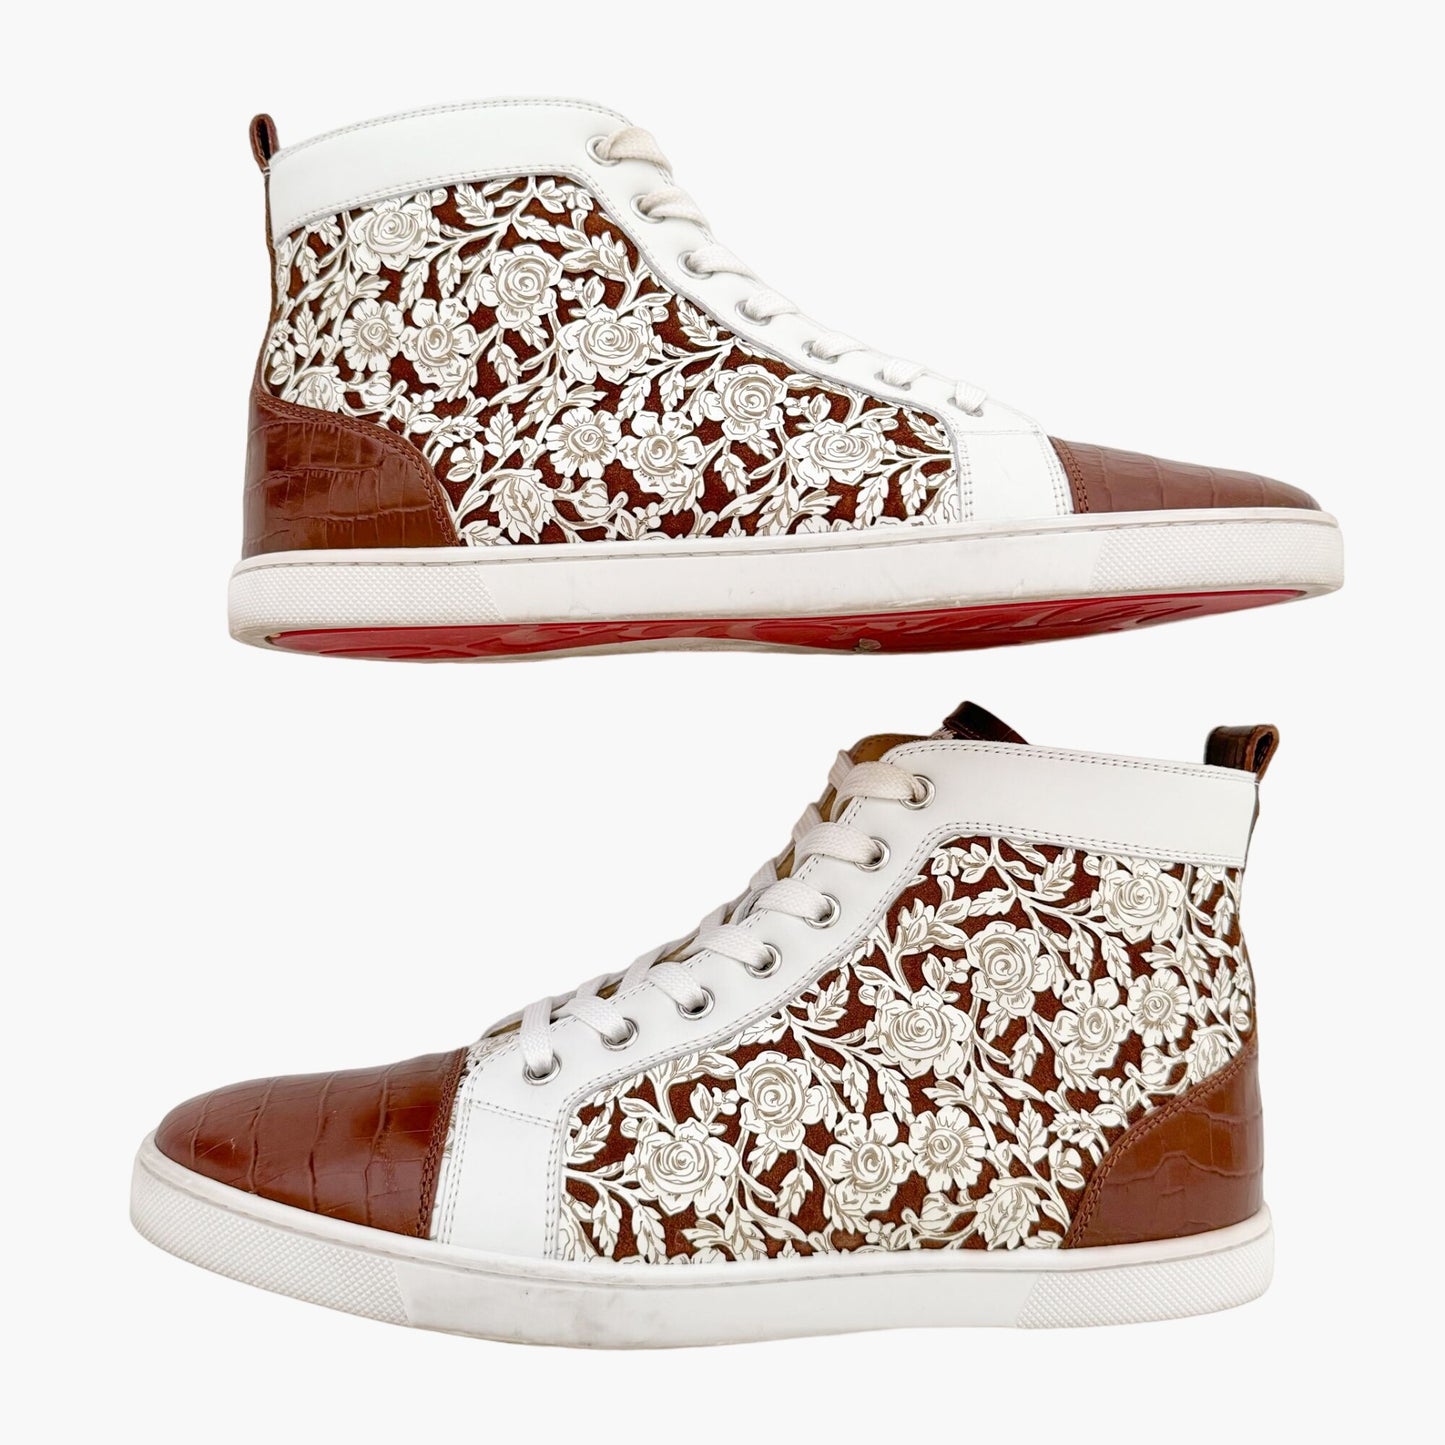 Christian Louboutin Bip Bip High Top Sneakers in Brown/White Floral Size 41